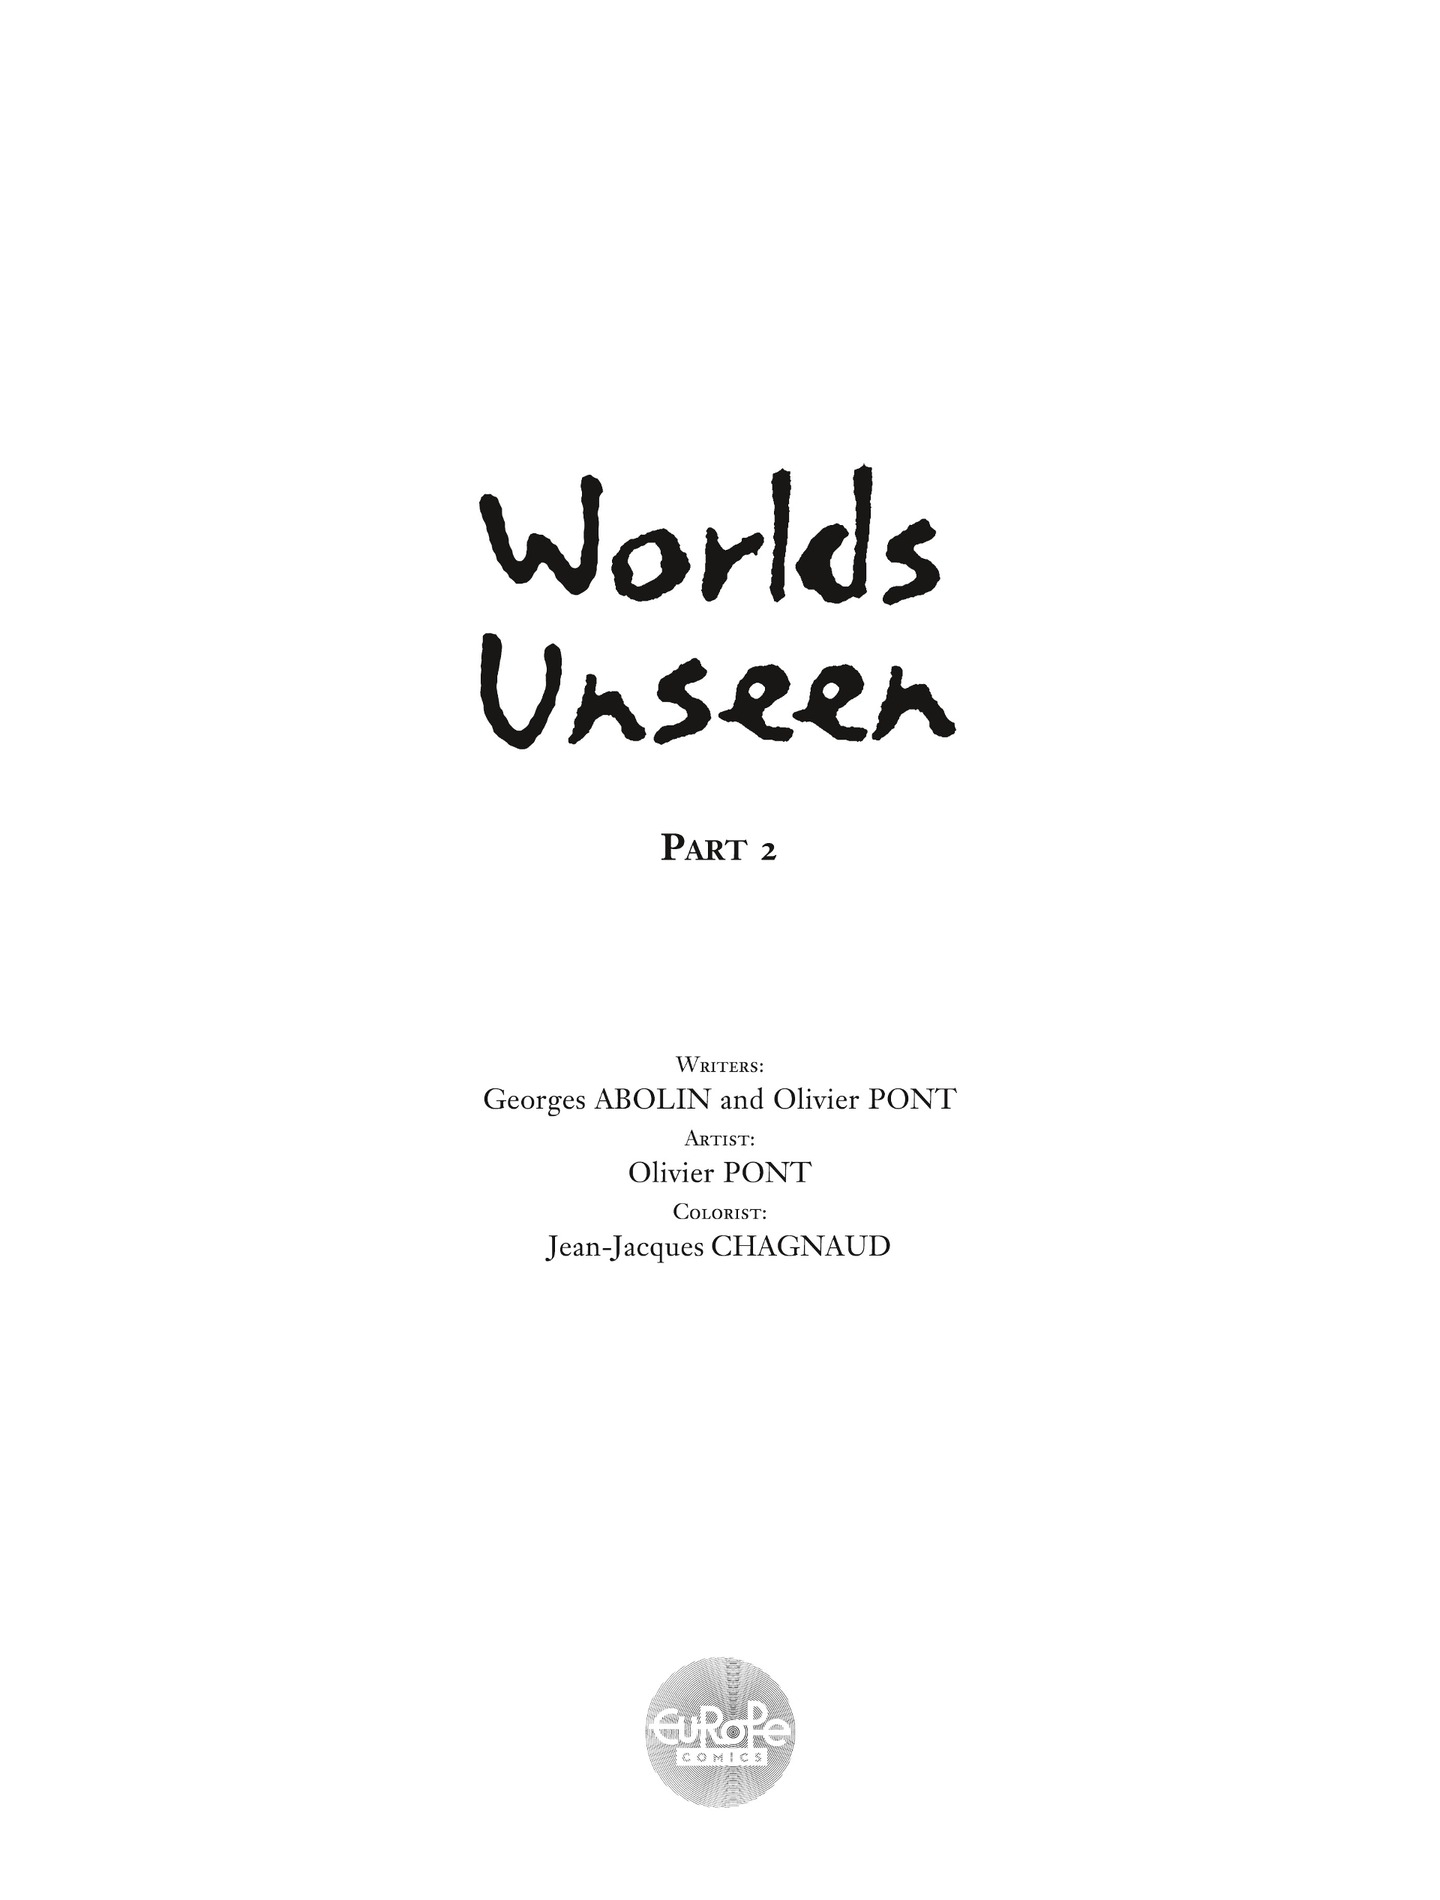 Read online Worlds Unseen comic -  Issue # TPB 2 - 2